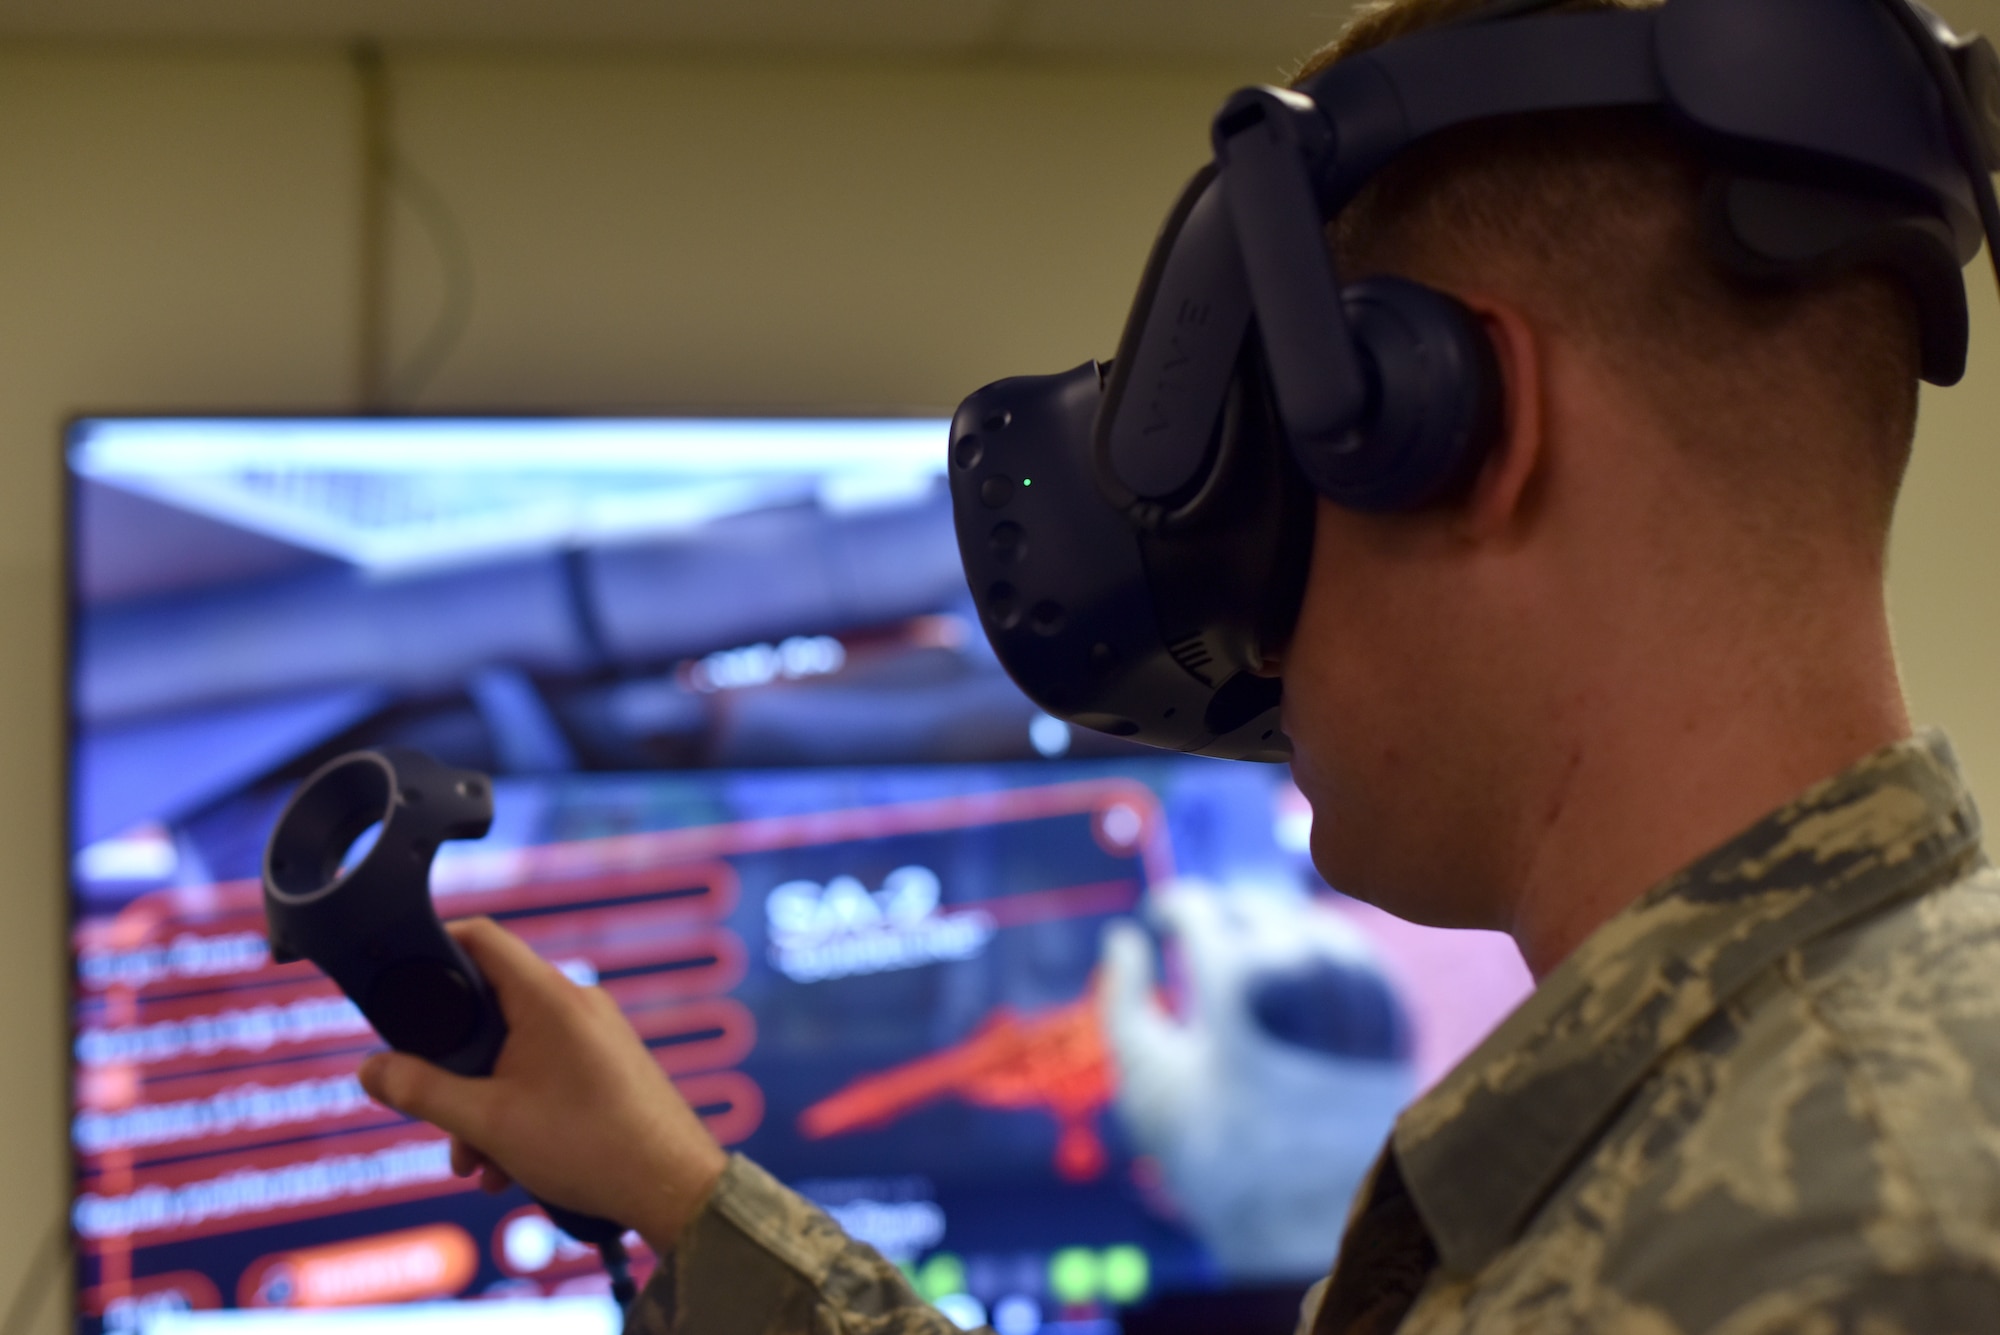 U.S. Air Force Airman 1st Class Wyatt Koppang, a 315th Training Squadron student, uses the new virtual reality software designed for the targeting career field at Brandenburg Hall on Goodfellow Air Force Base, July 11, 2019. This portion of the course allows students to view not readily accessed munitions while attending their training. (U.S. Air Force photo by Senior Airman Seraiah Wolf/Released)